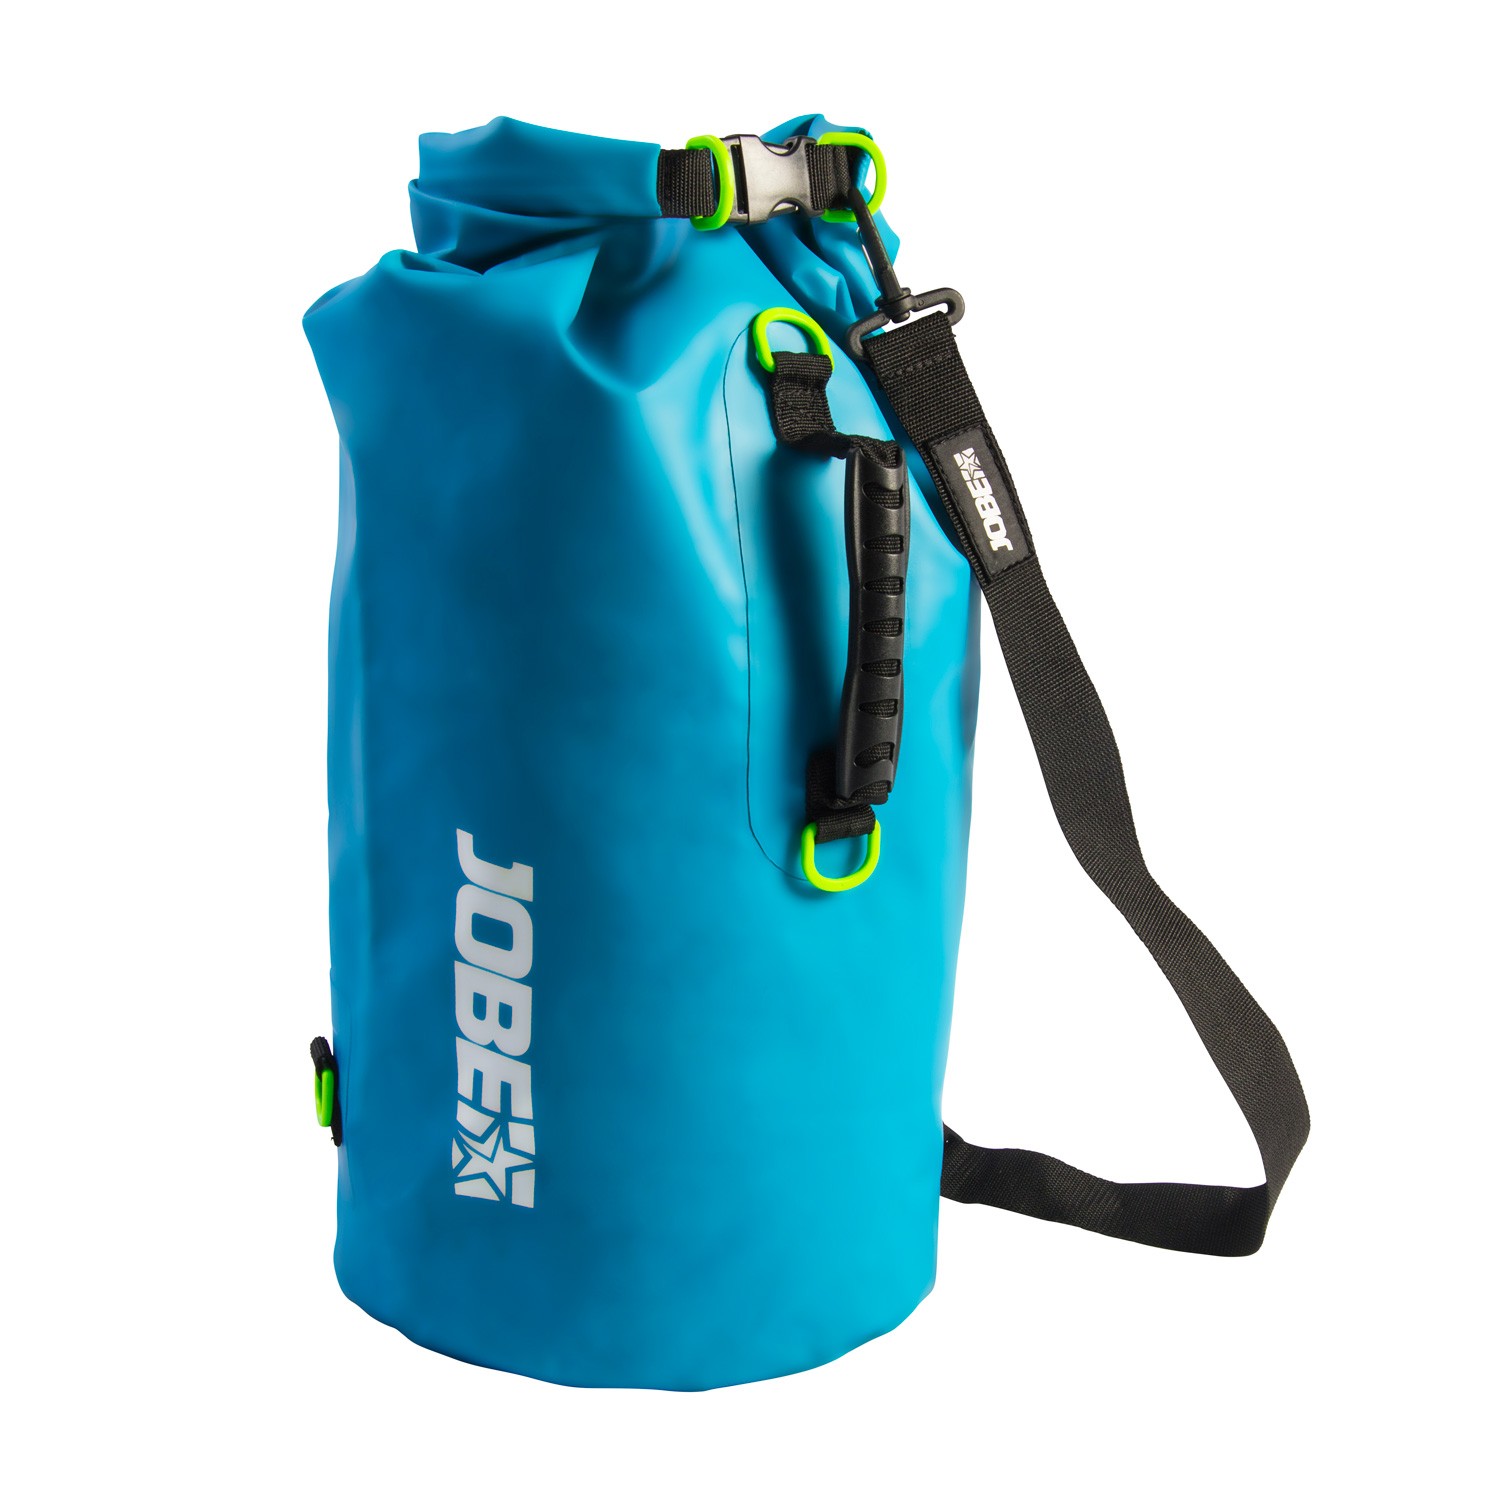 6 best dry bags for on-water adventures | Herald Sun